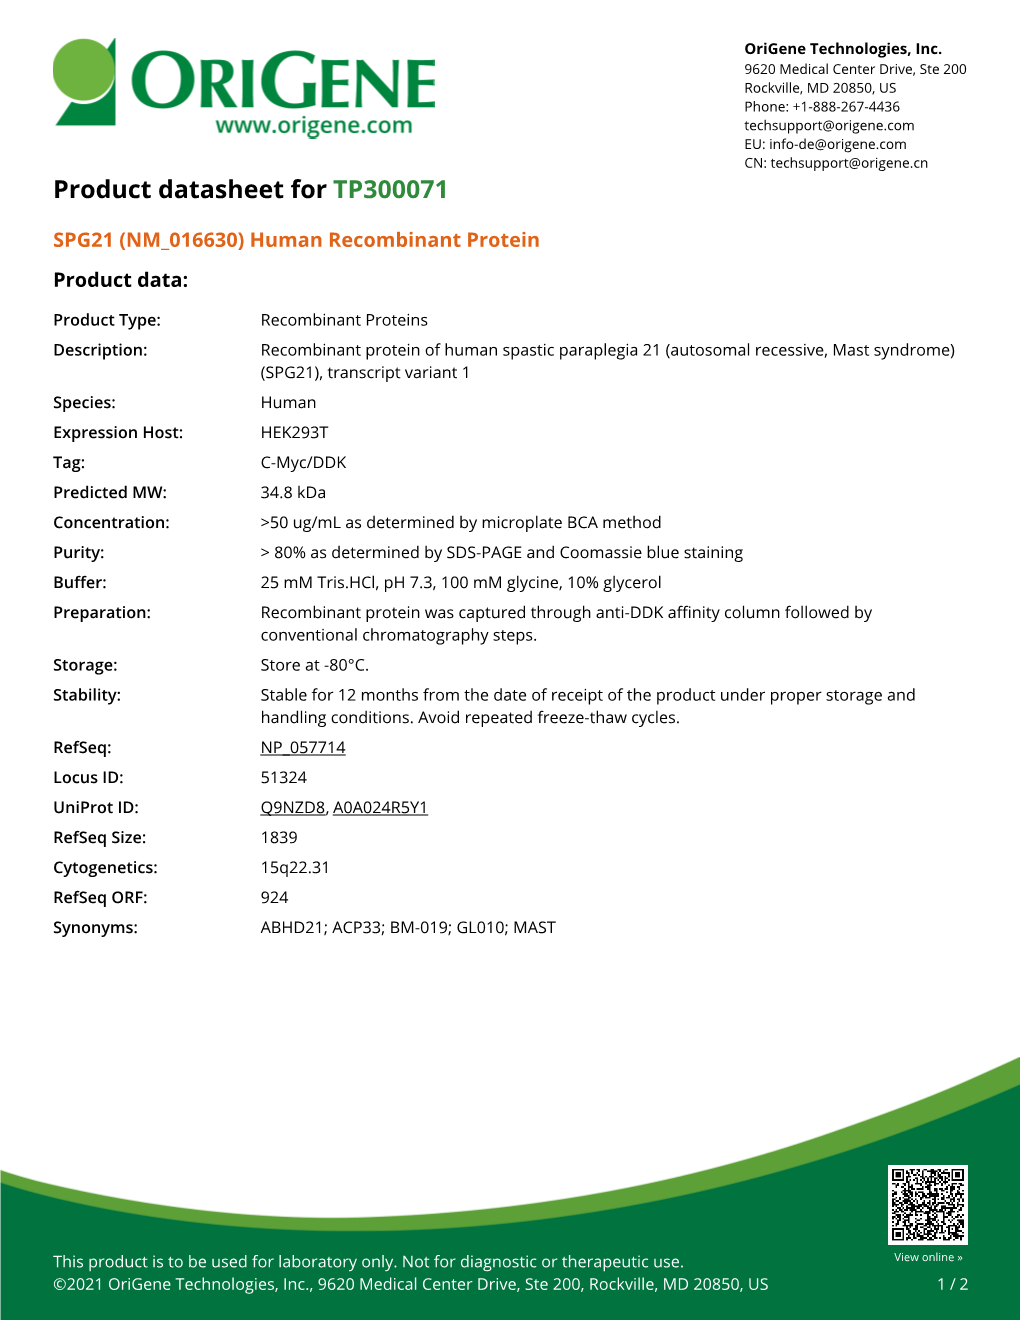 SPG21 (NM 016630) Human Recombinant Protein Product Data